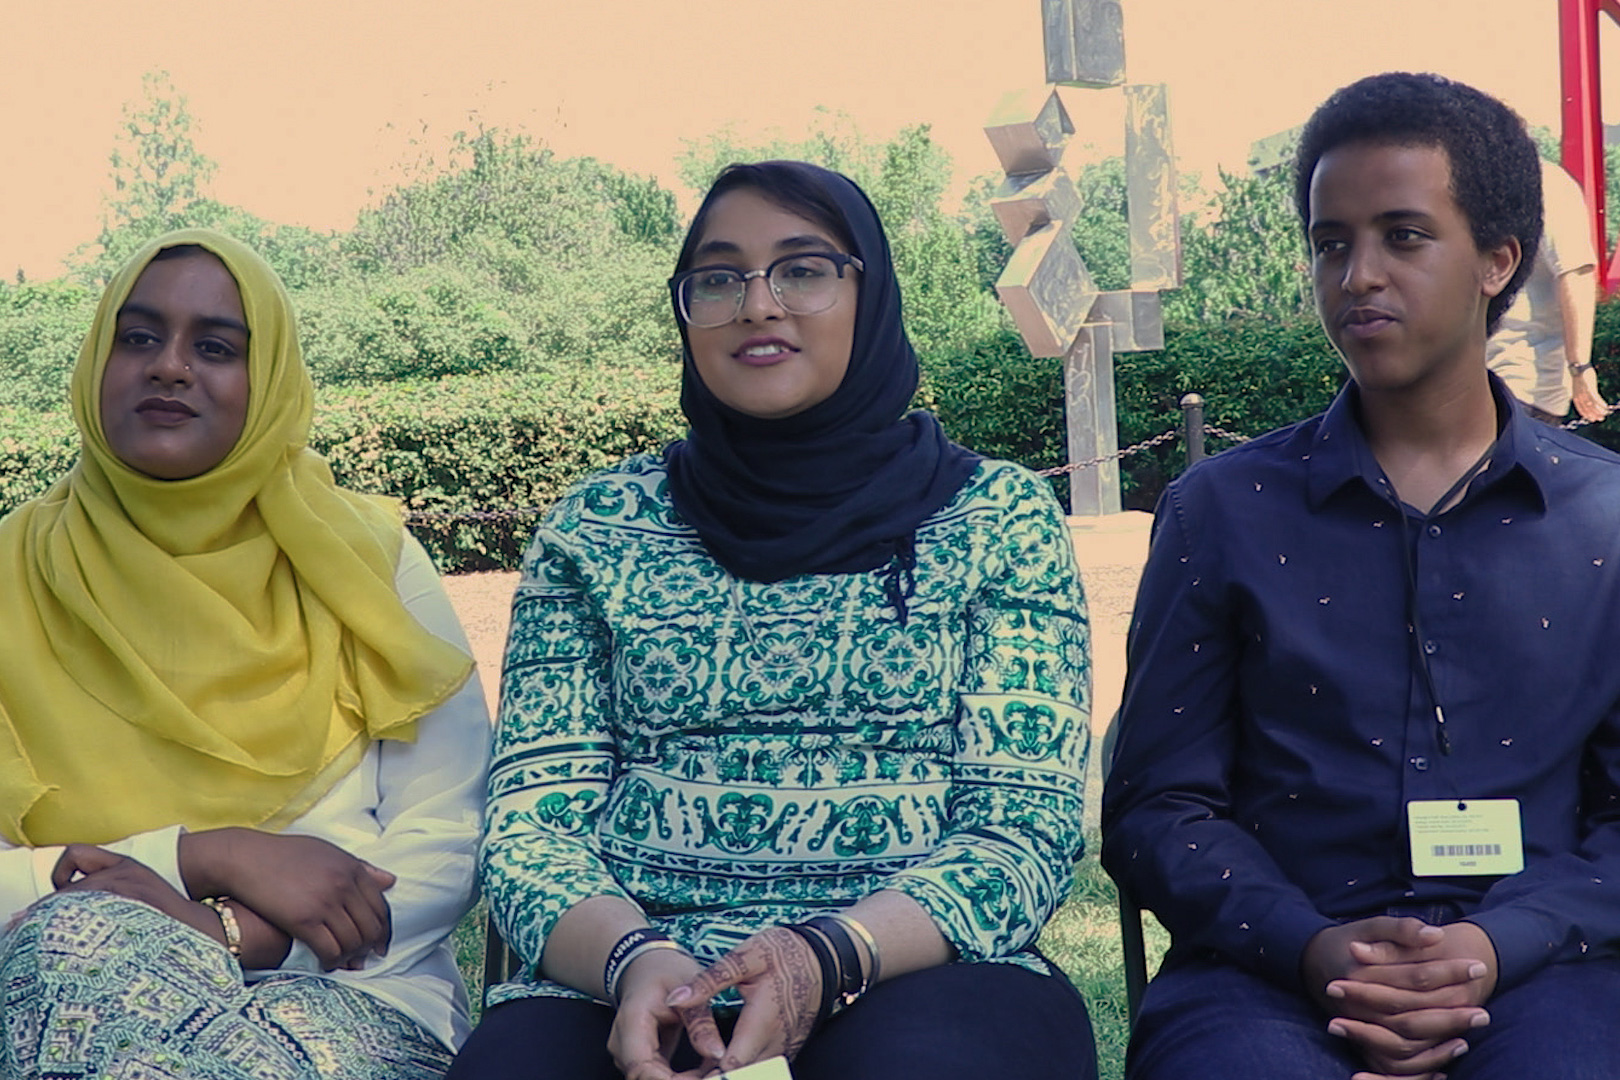 Three people, including two women in hijab, sit side by side for an interview.